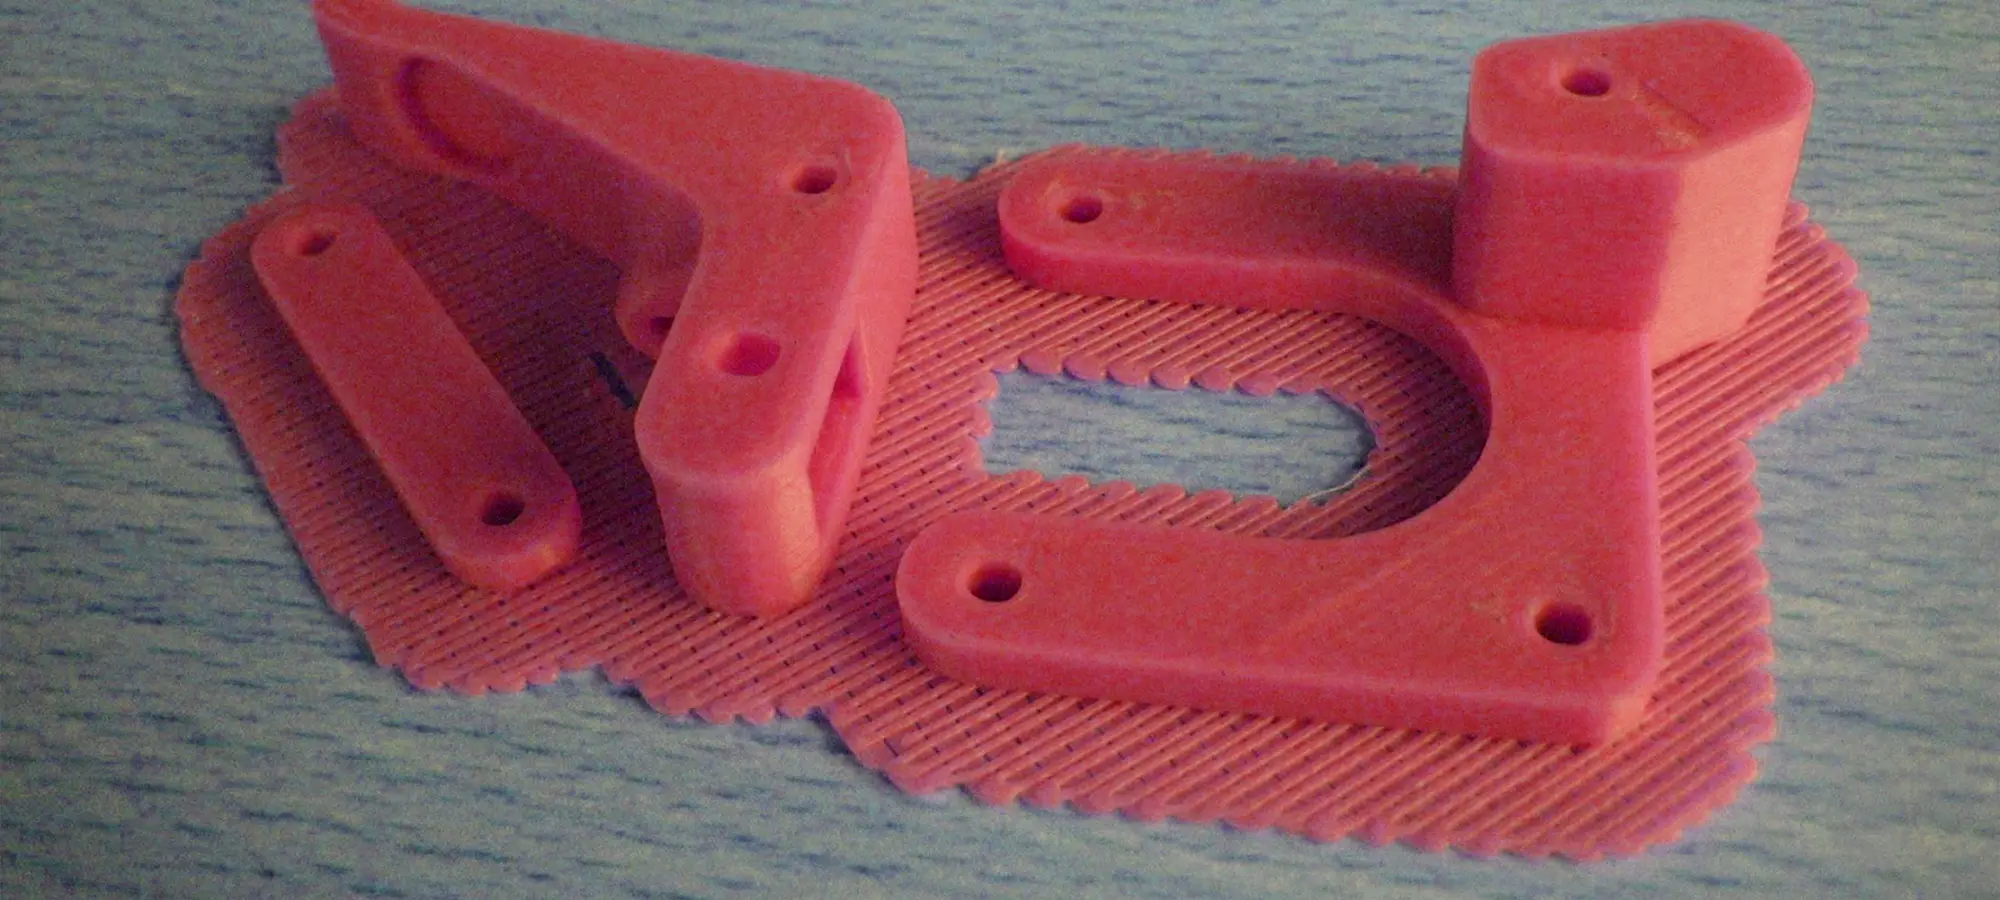 pisk Relaterede Bevidst 3D Printing Raft - Learn How to 3D Print With? - Pick 3D Printer